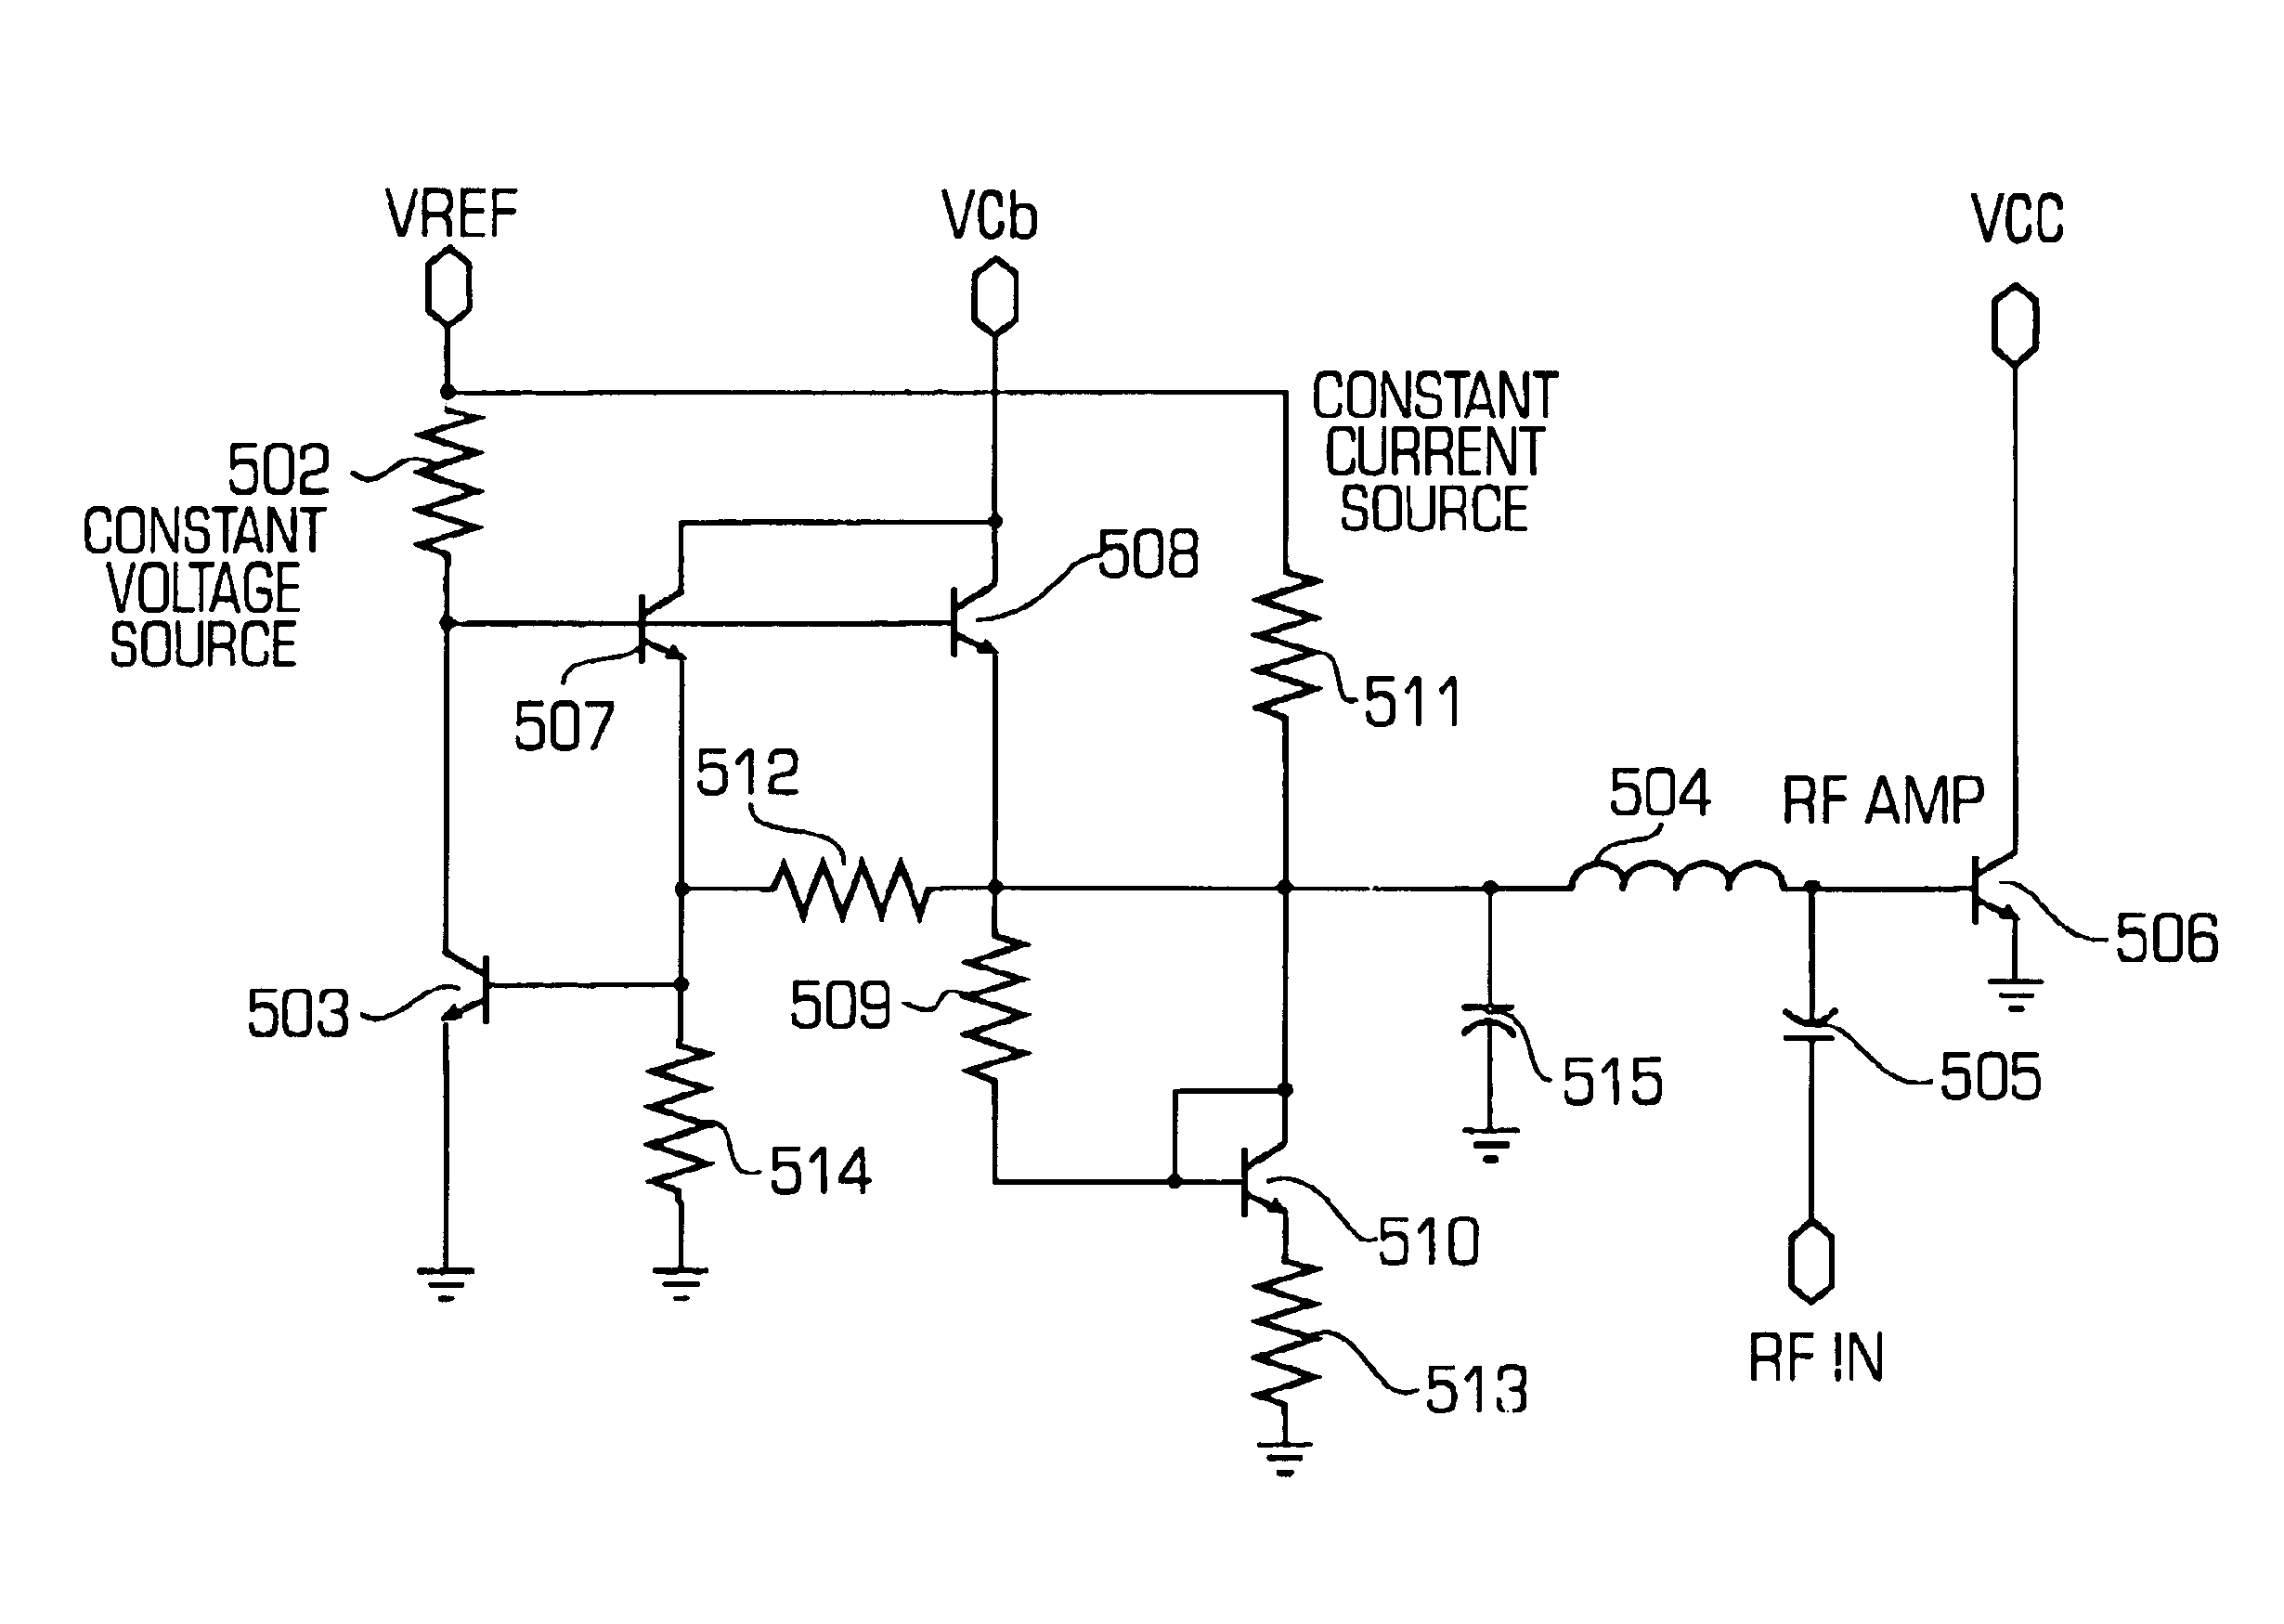 Dual (constant voltage/constant current) bias supply for linear power amplifiers